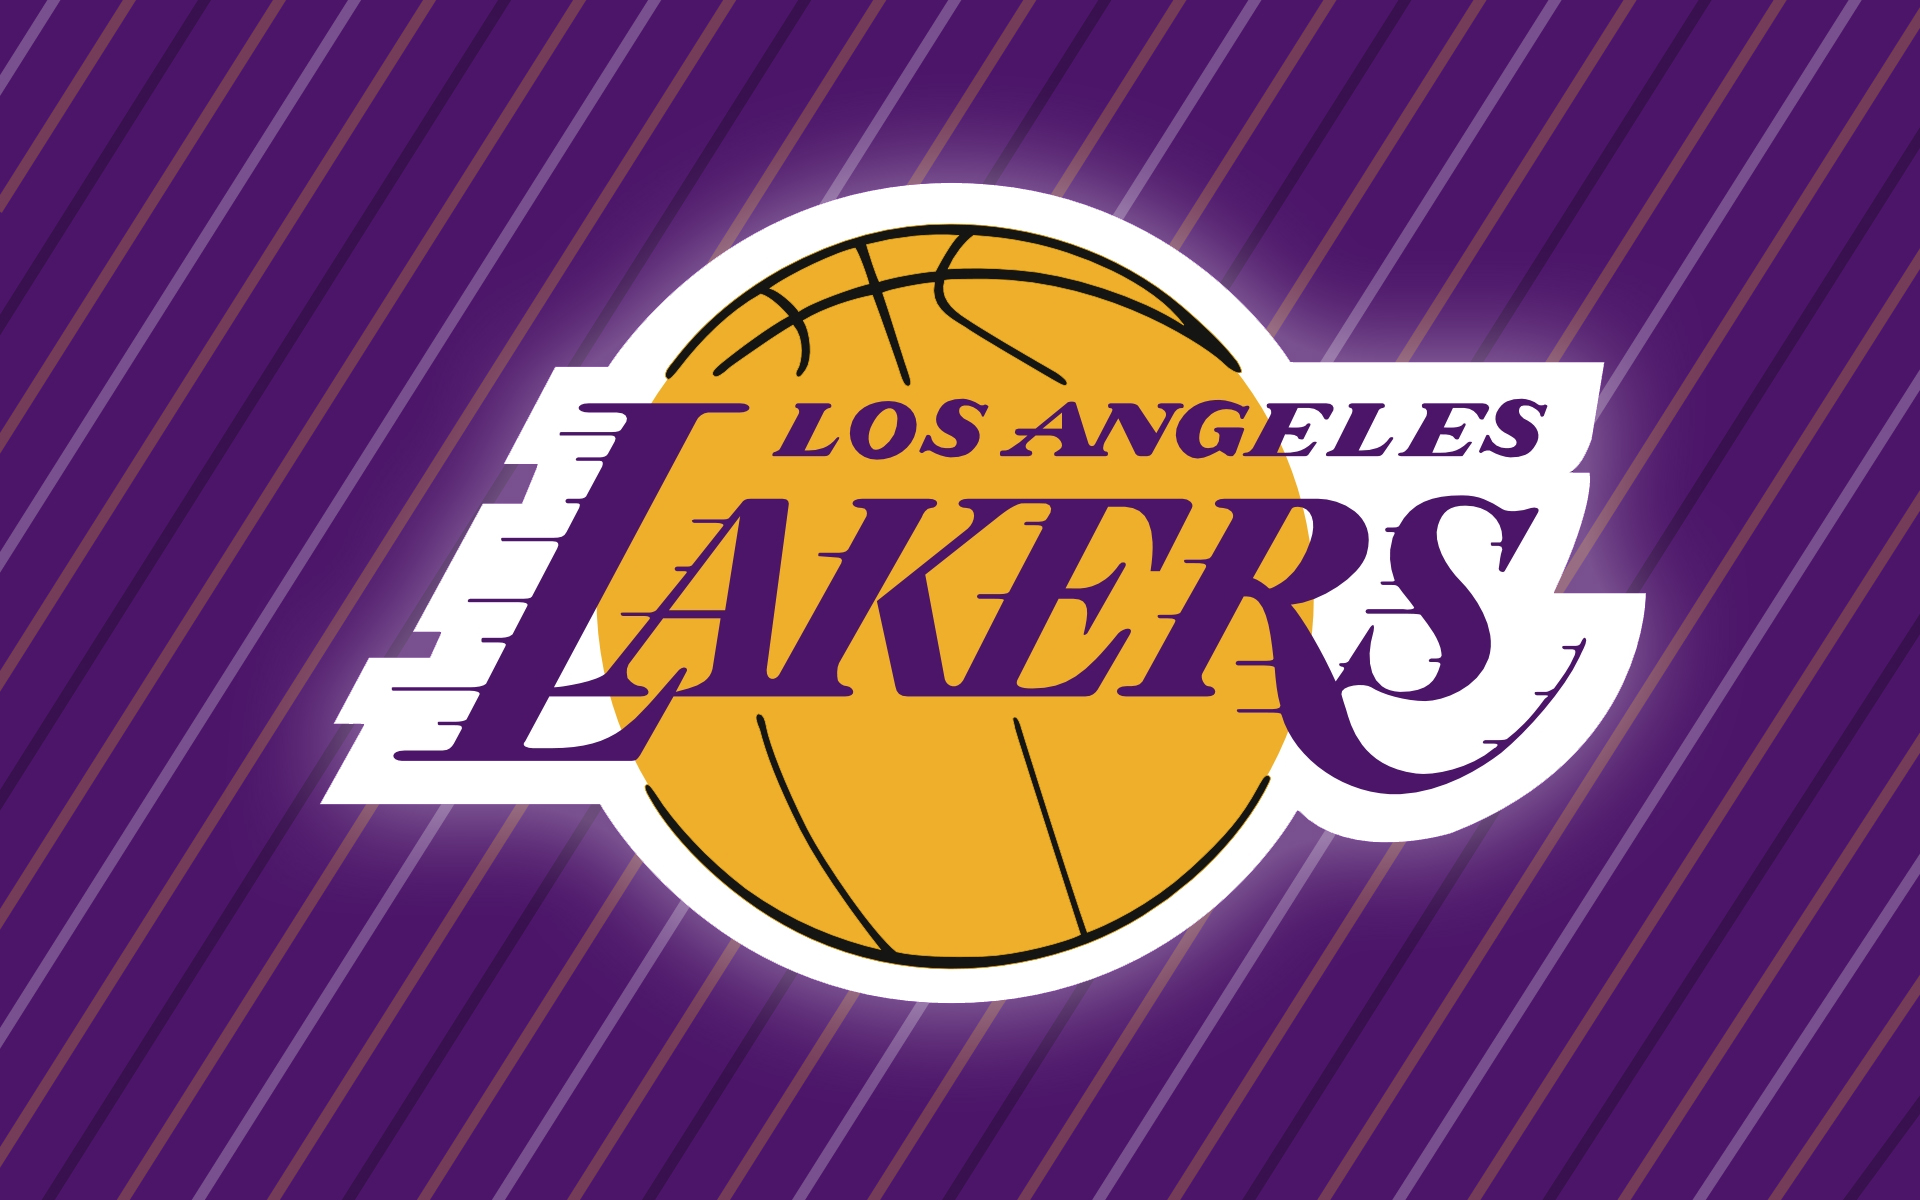 Lakers Logo Wallpapers | Wallpapers, Backgrounds, Images, Art Photos.